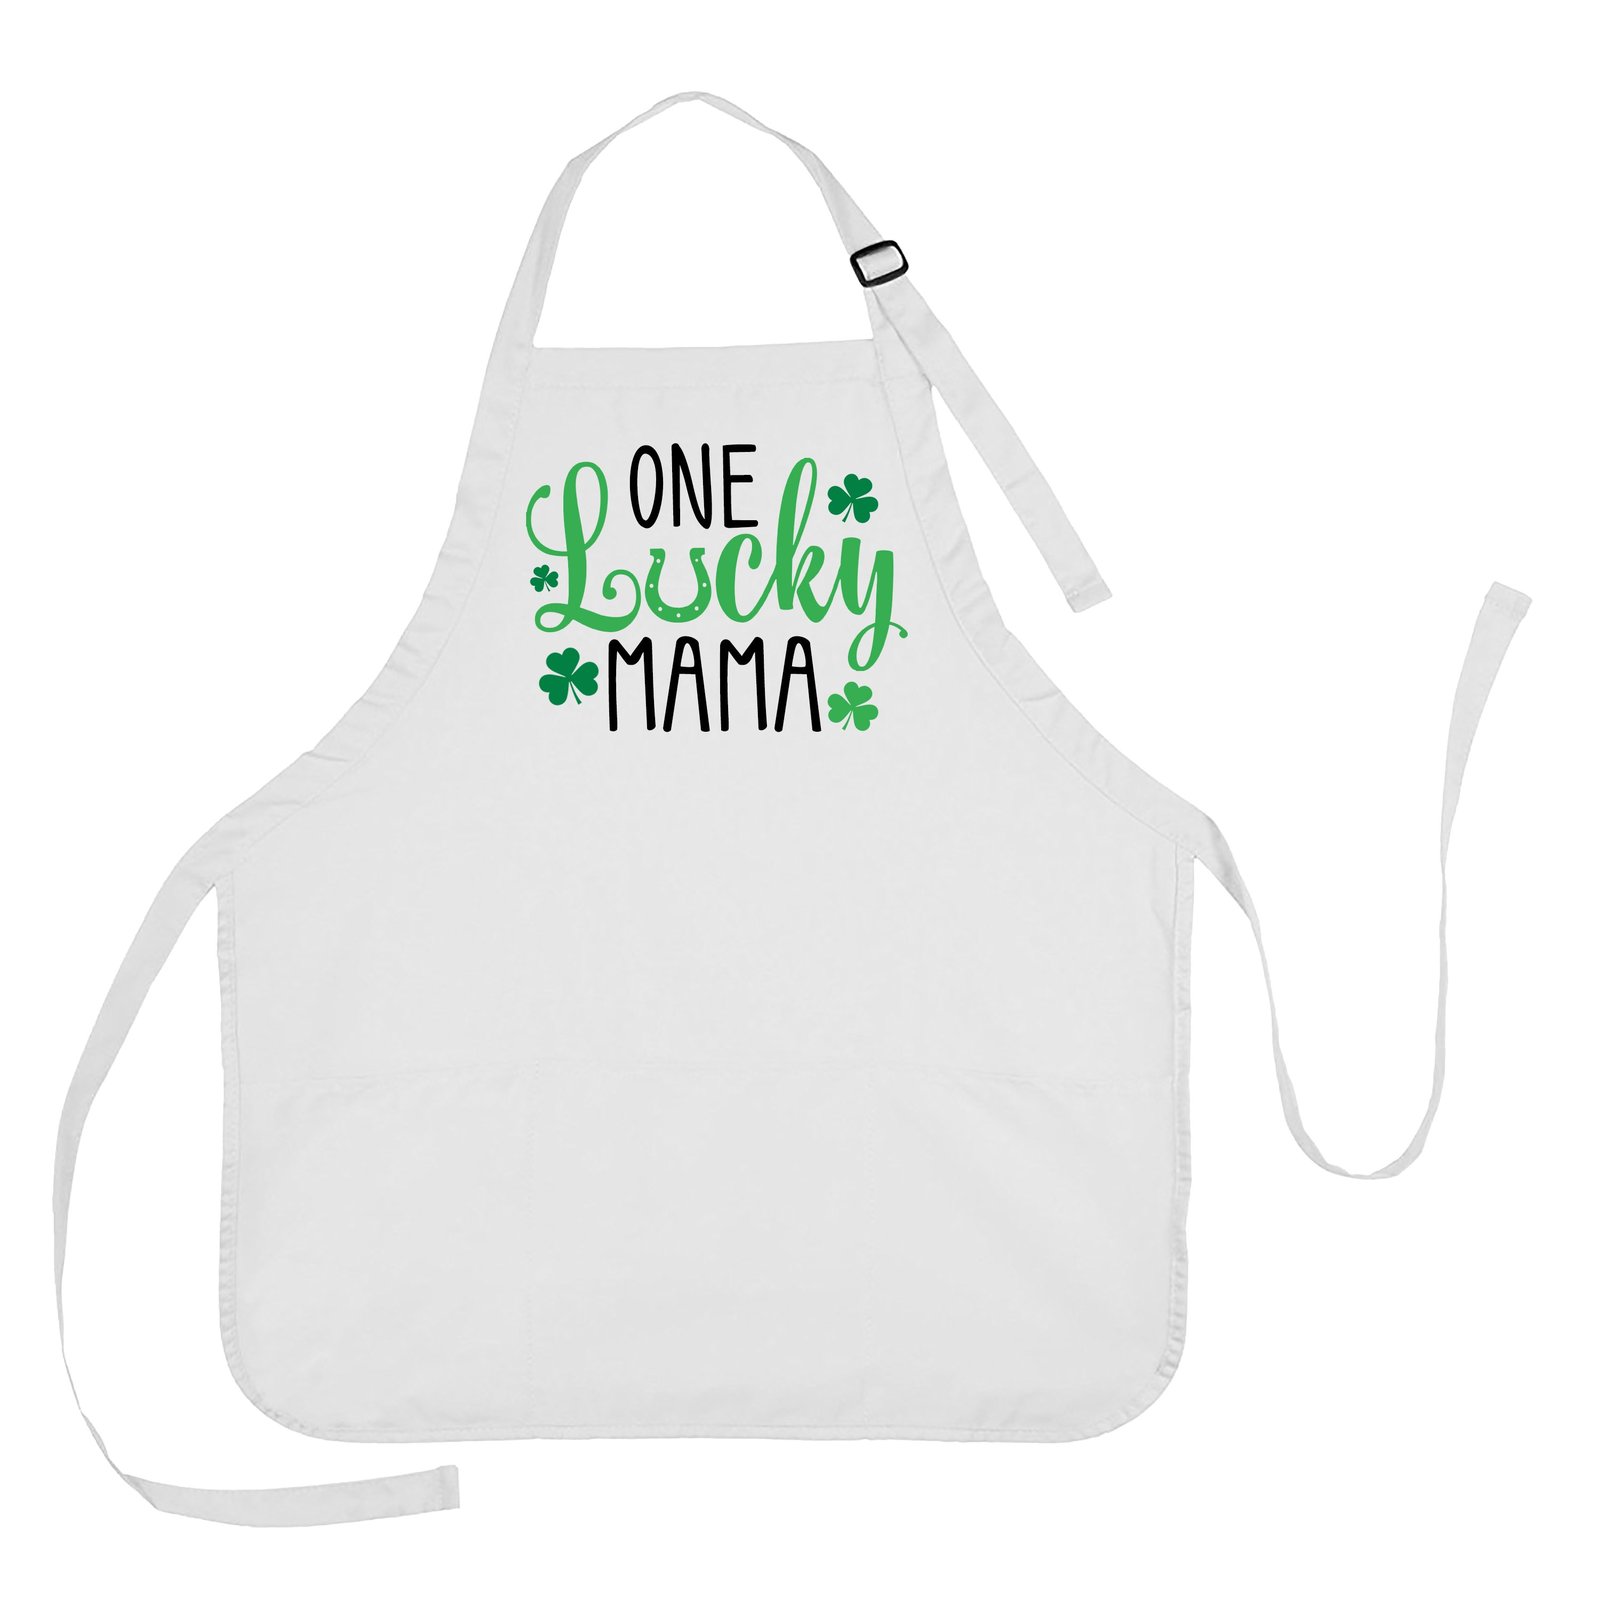 Primary image for One Lucky Mama Apron, St Patricks Day Apron, St Patricks Day Apron for Mom, Iris